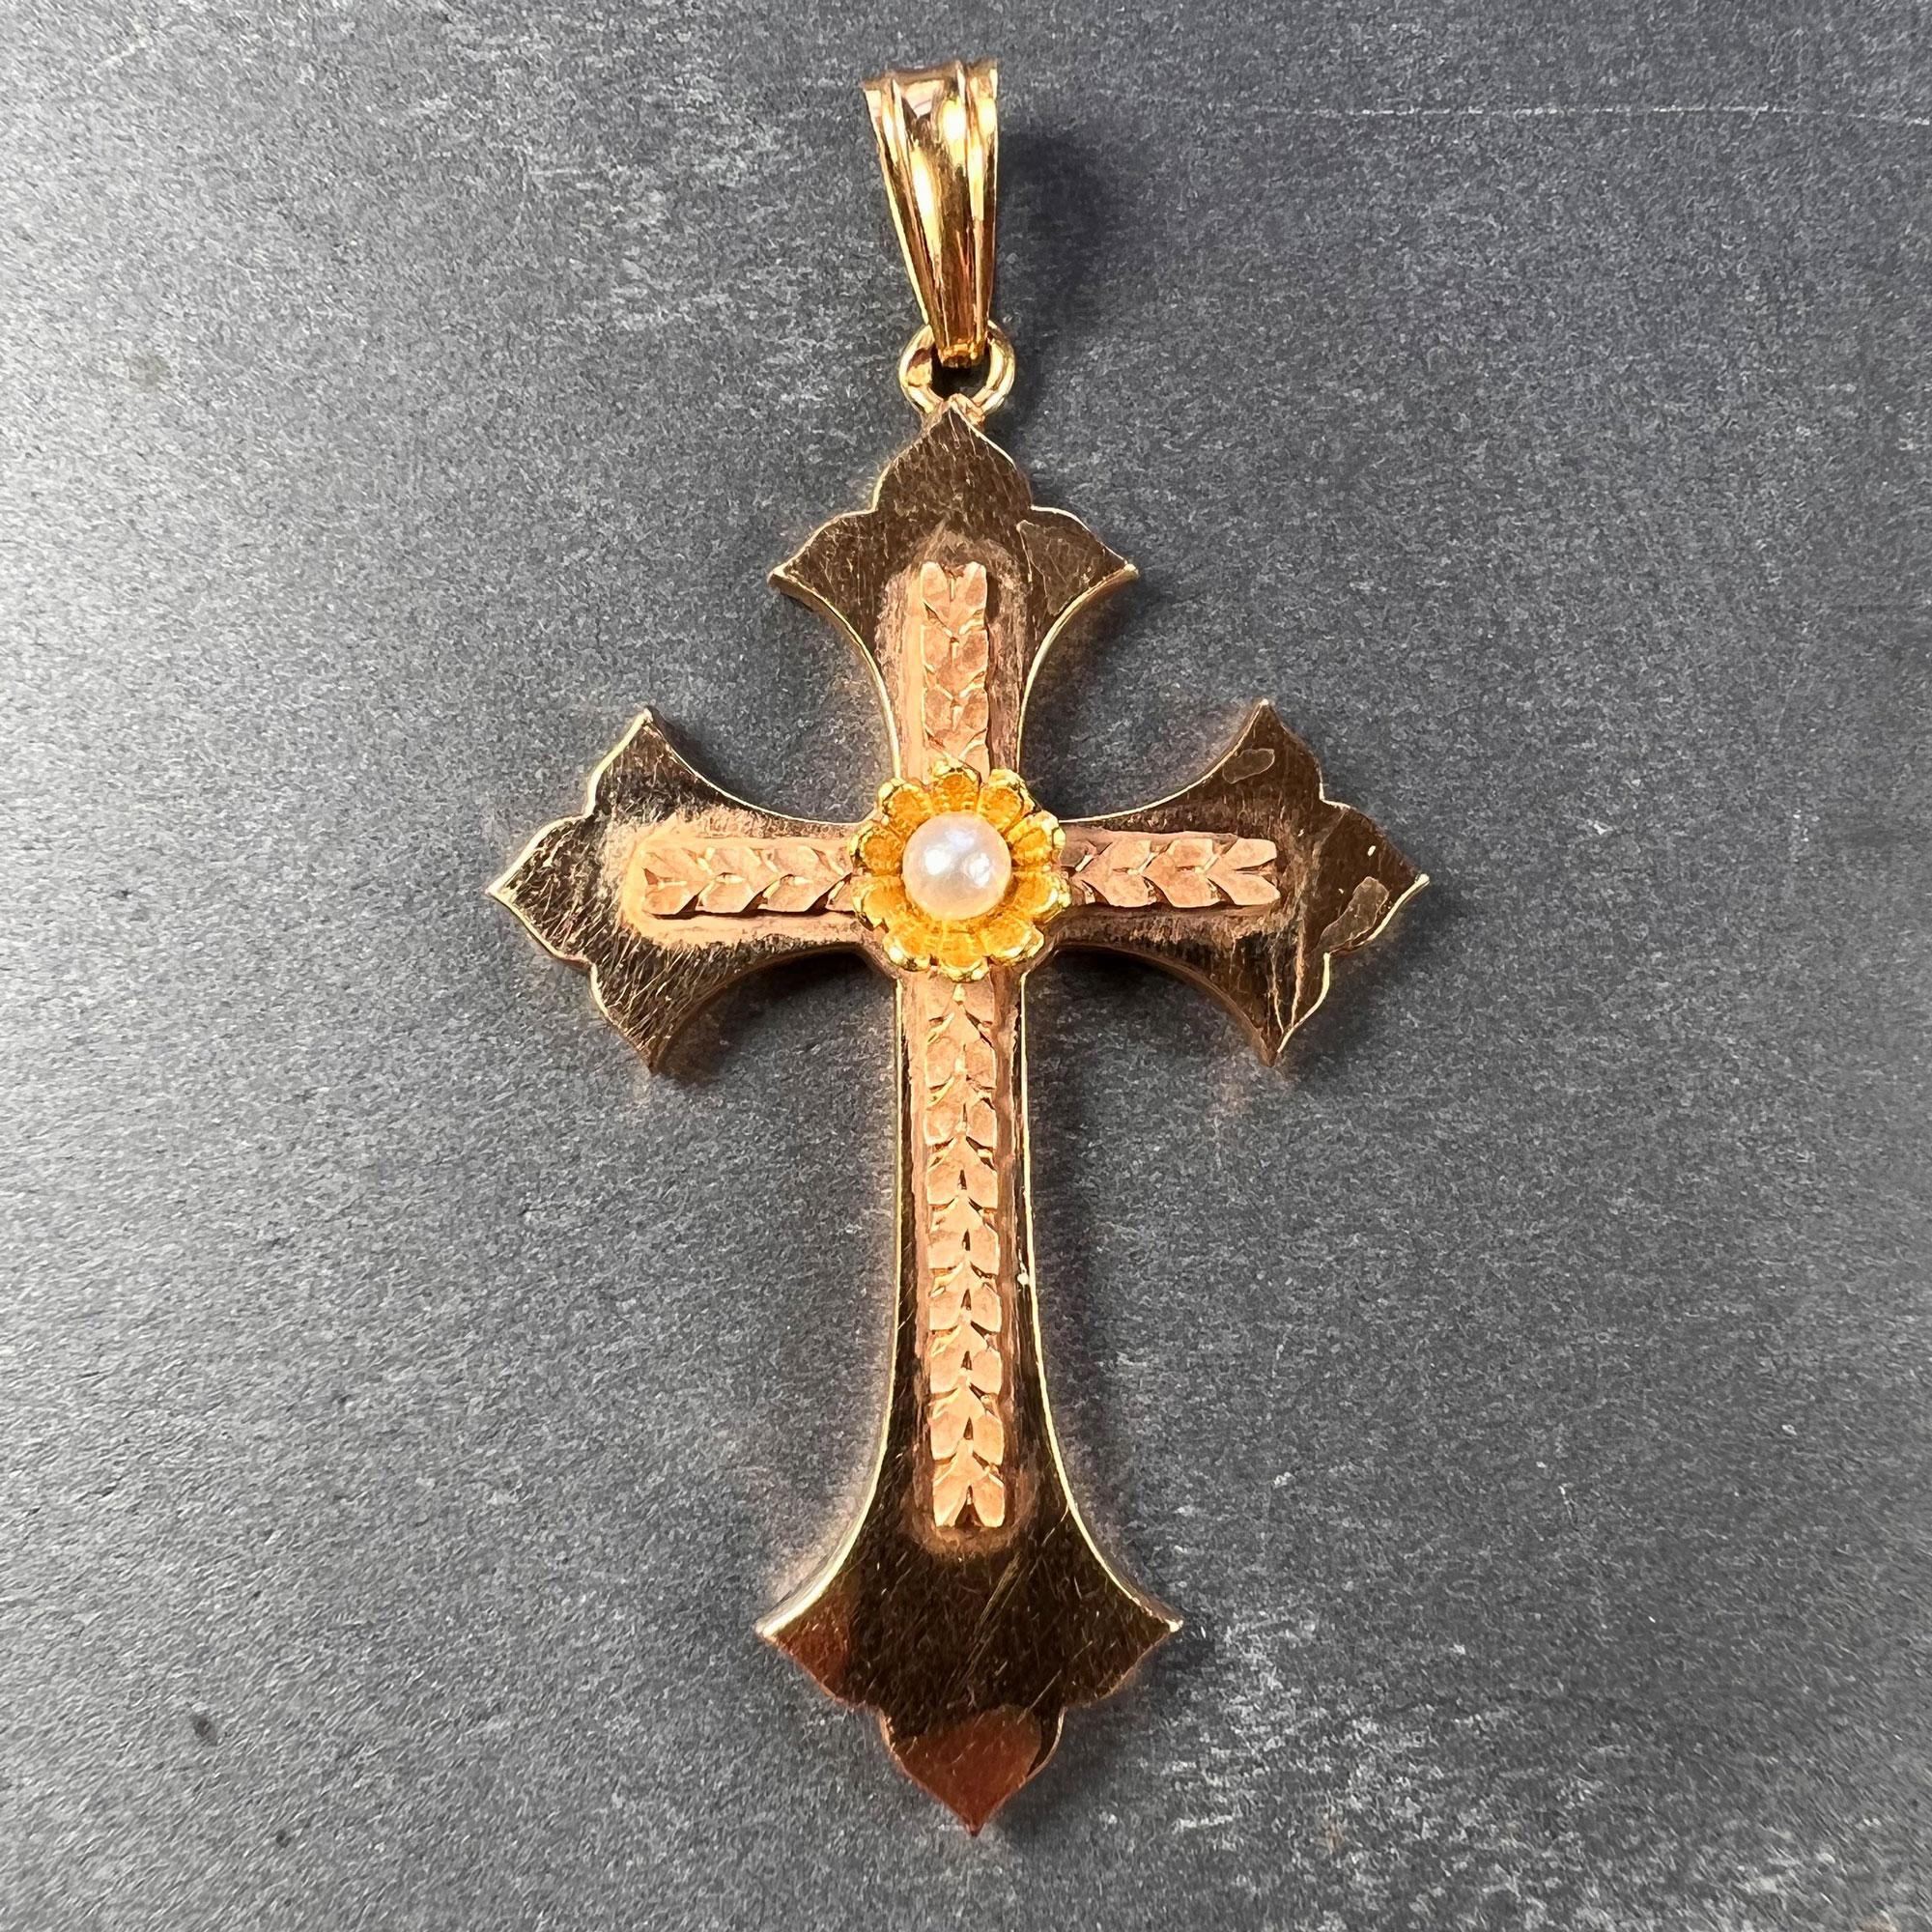 A hollow 18 karat (18K) rose gold pendant designed as a cross with a yellow gold centrepiece set with a natural pearl measuring 3.5mm. Stamped with the eagle mark for 18 karat goldand French manufacture with an unknown maker's mark.

Dimensions: 4.9